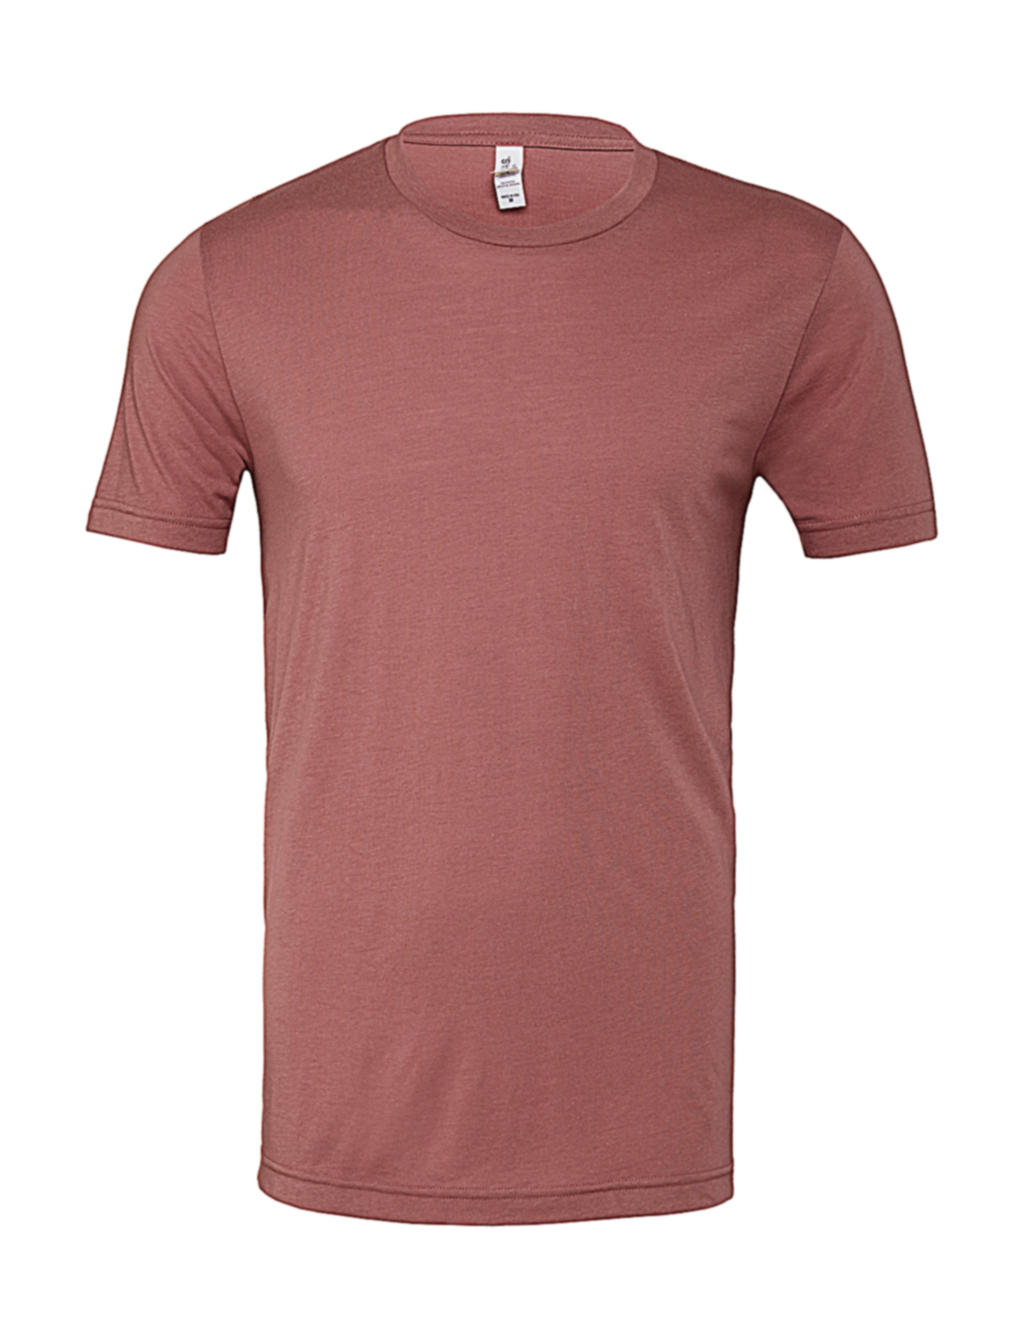  Unisex Triblend Short Sleeve Tee in Farbe Mauve Triblend